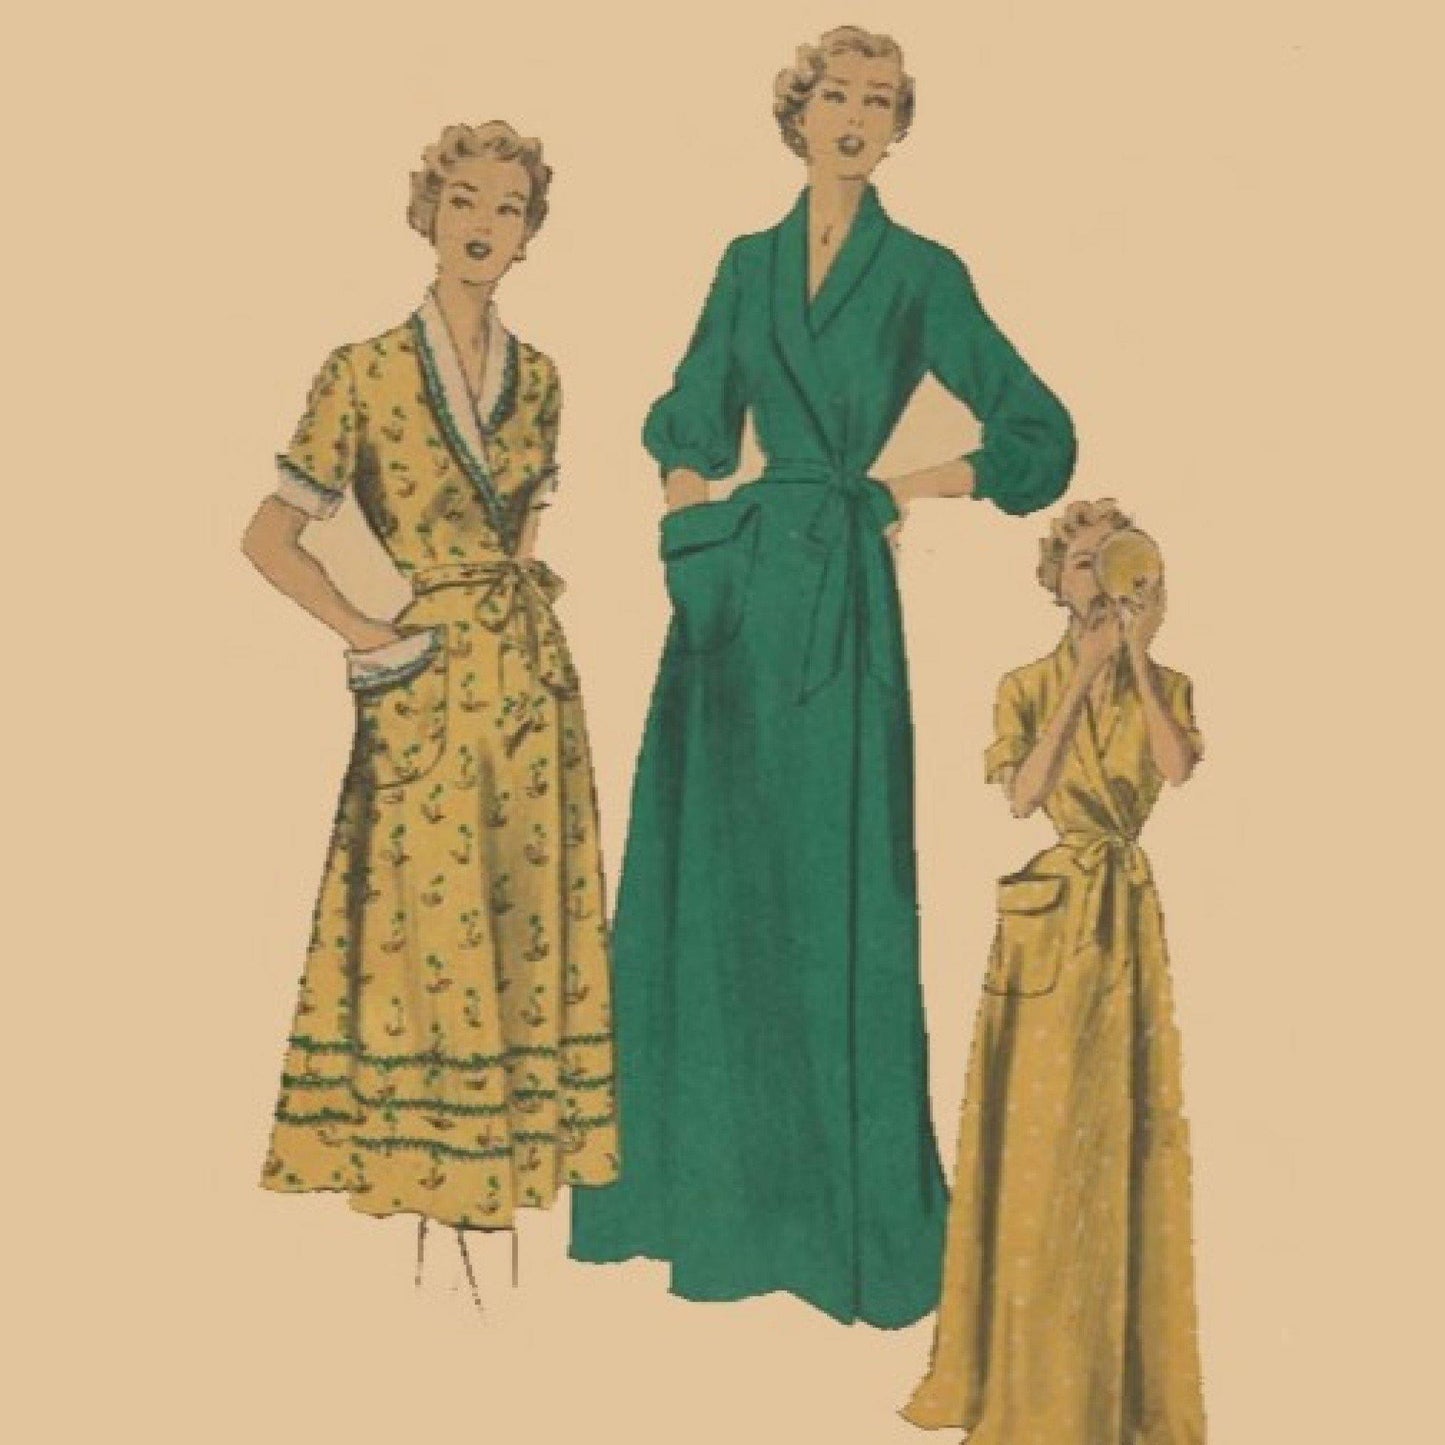 Vintage 1950s Pattern, Women's Dressing Gowns, House Coats PDF Download - Vintage Sewing Pattern Company